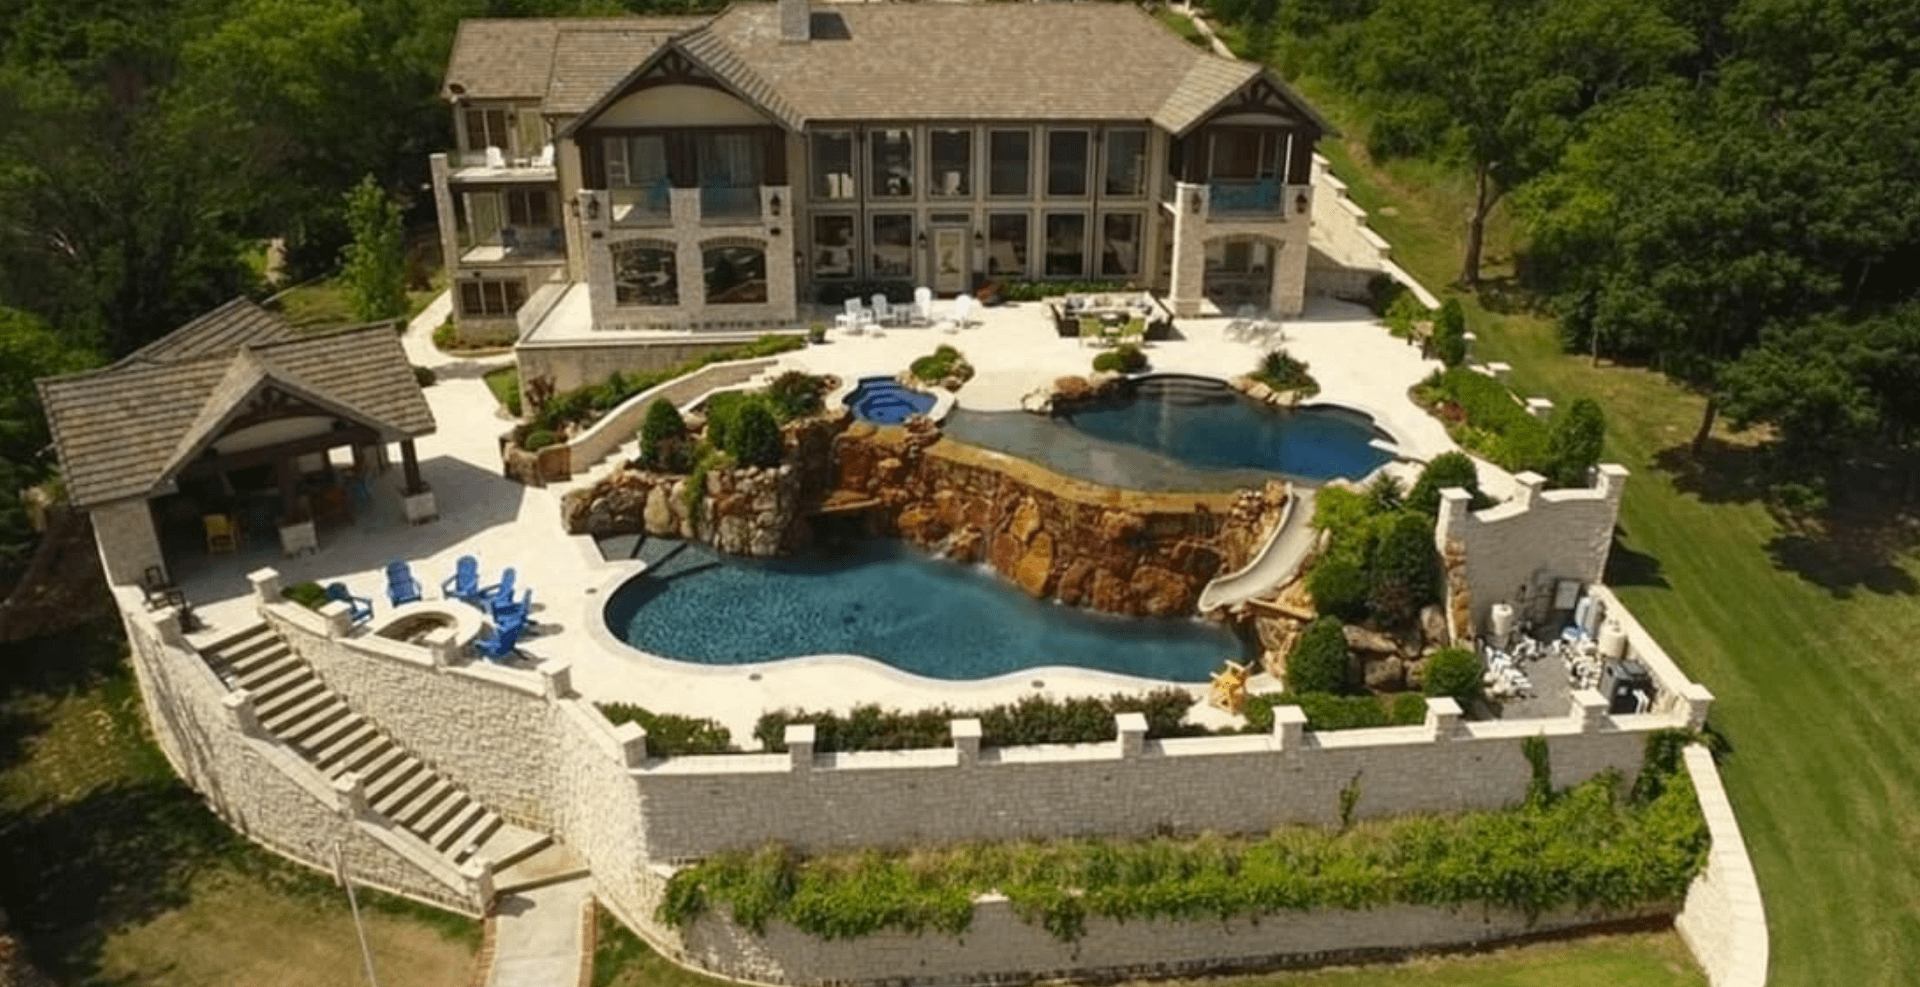 Lakefront Texas Home With 2 Pools & Helipad (PHOTOS)